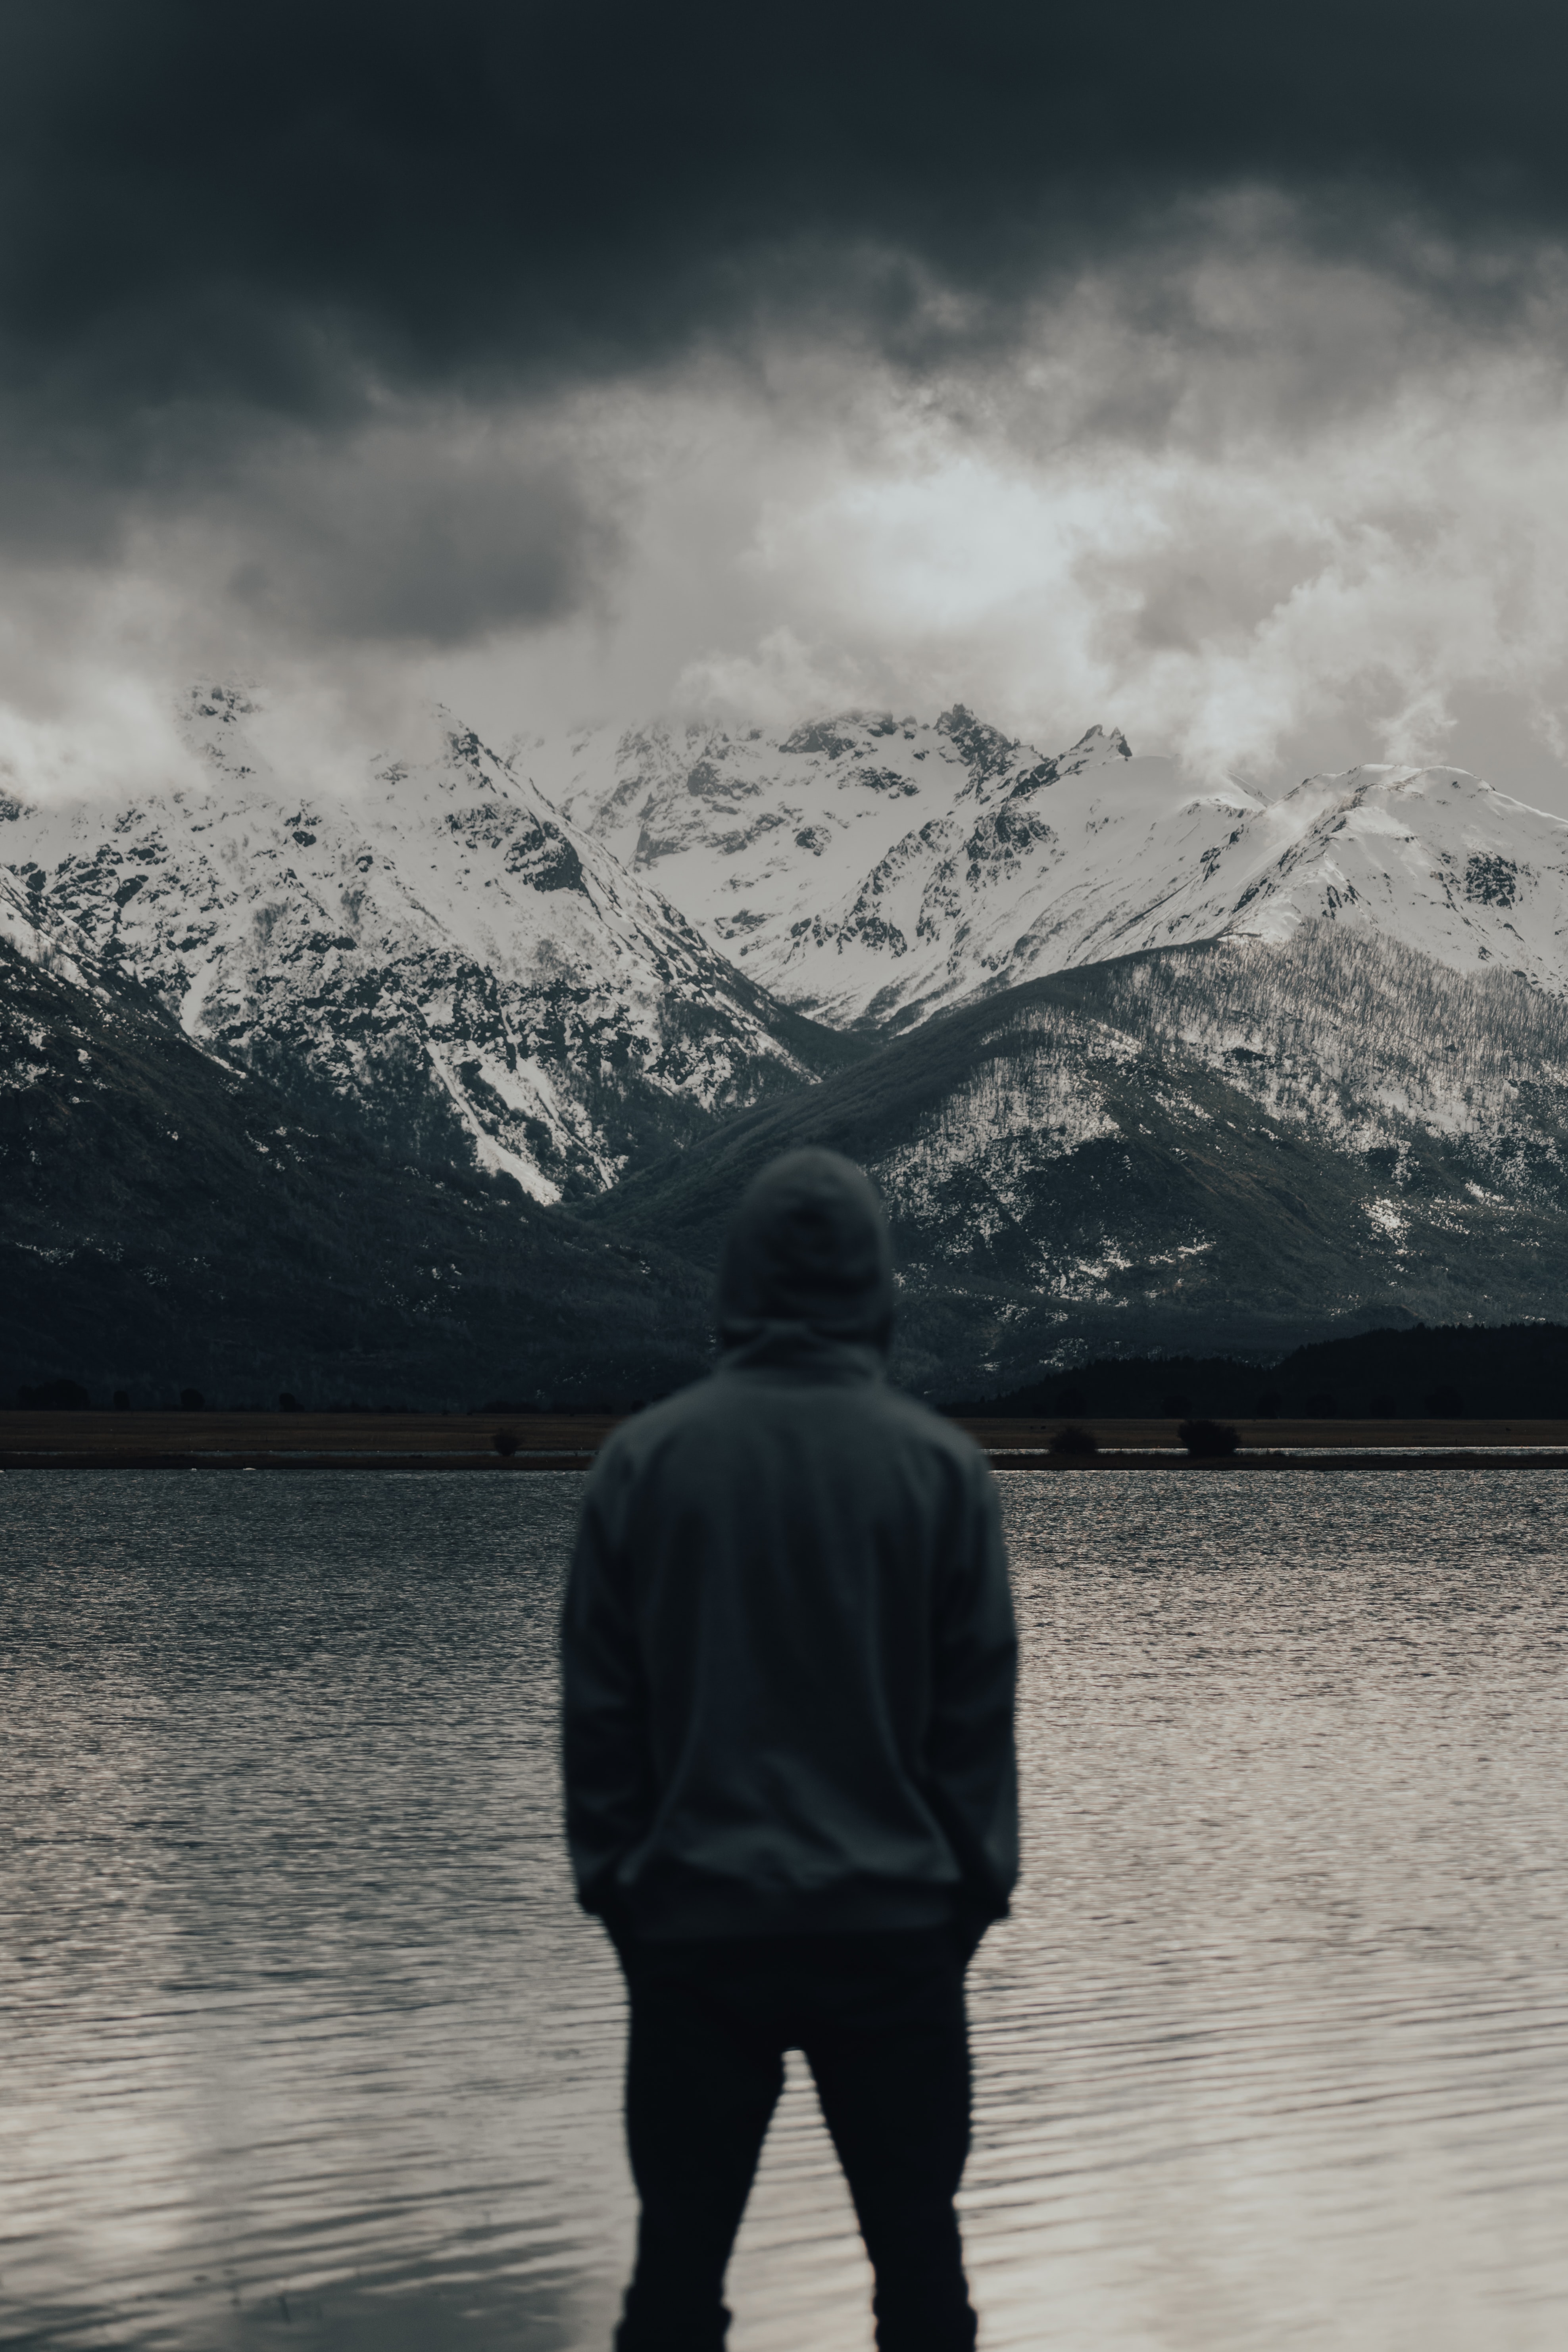 human, nature, mountains, lake, miscellanea, miscellaneous, person, loneliness Full HD